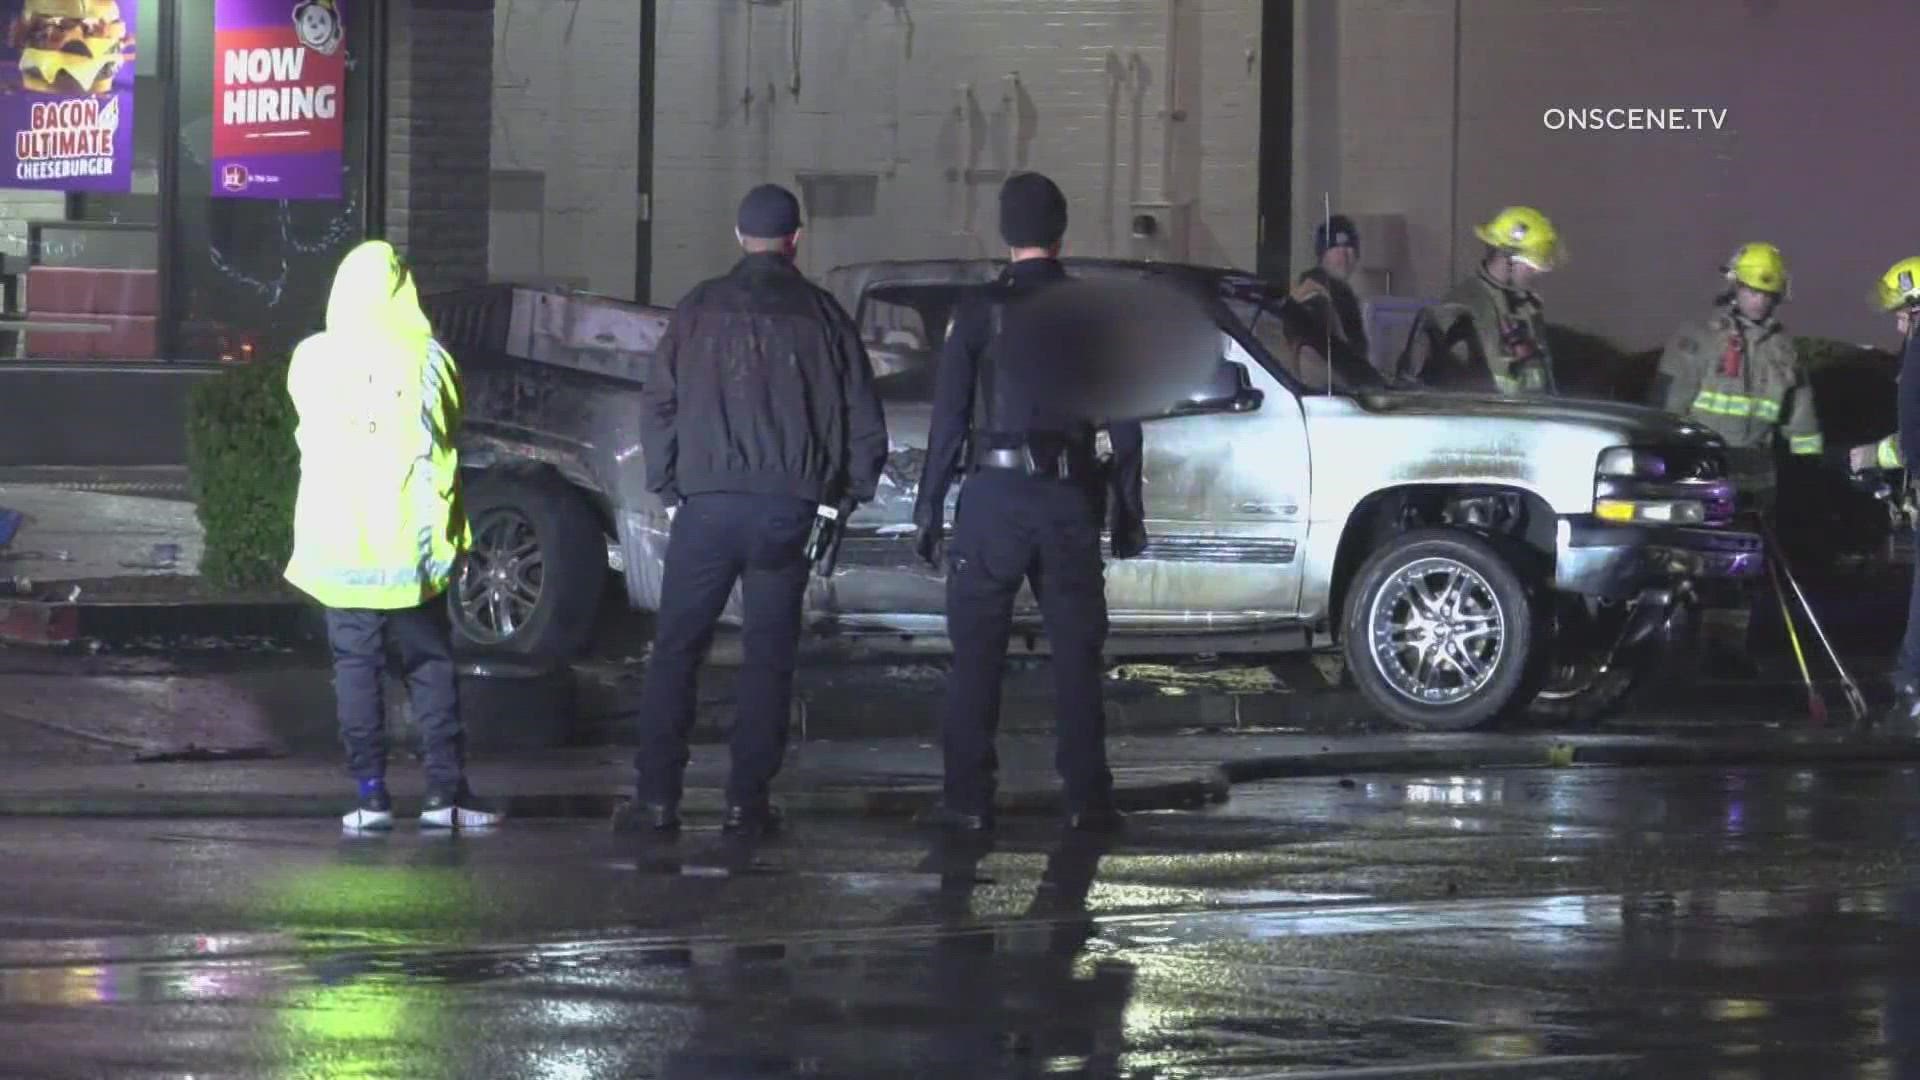 Three people died Saturday night in Phoenix after their car caught fire in a traffic collision near 59th Avenue and Thomas Road.